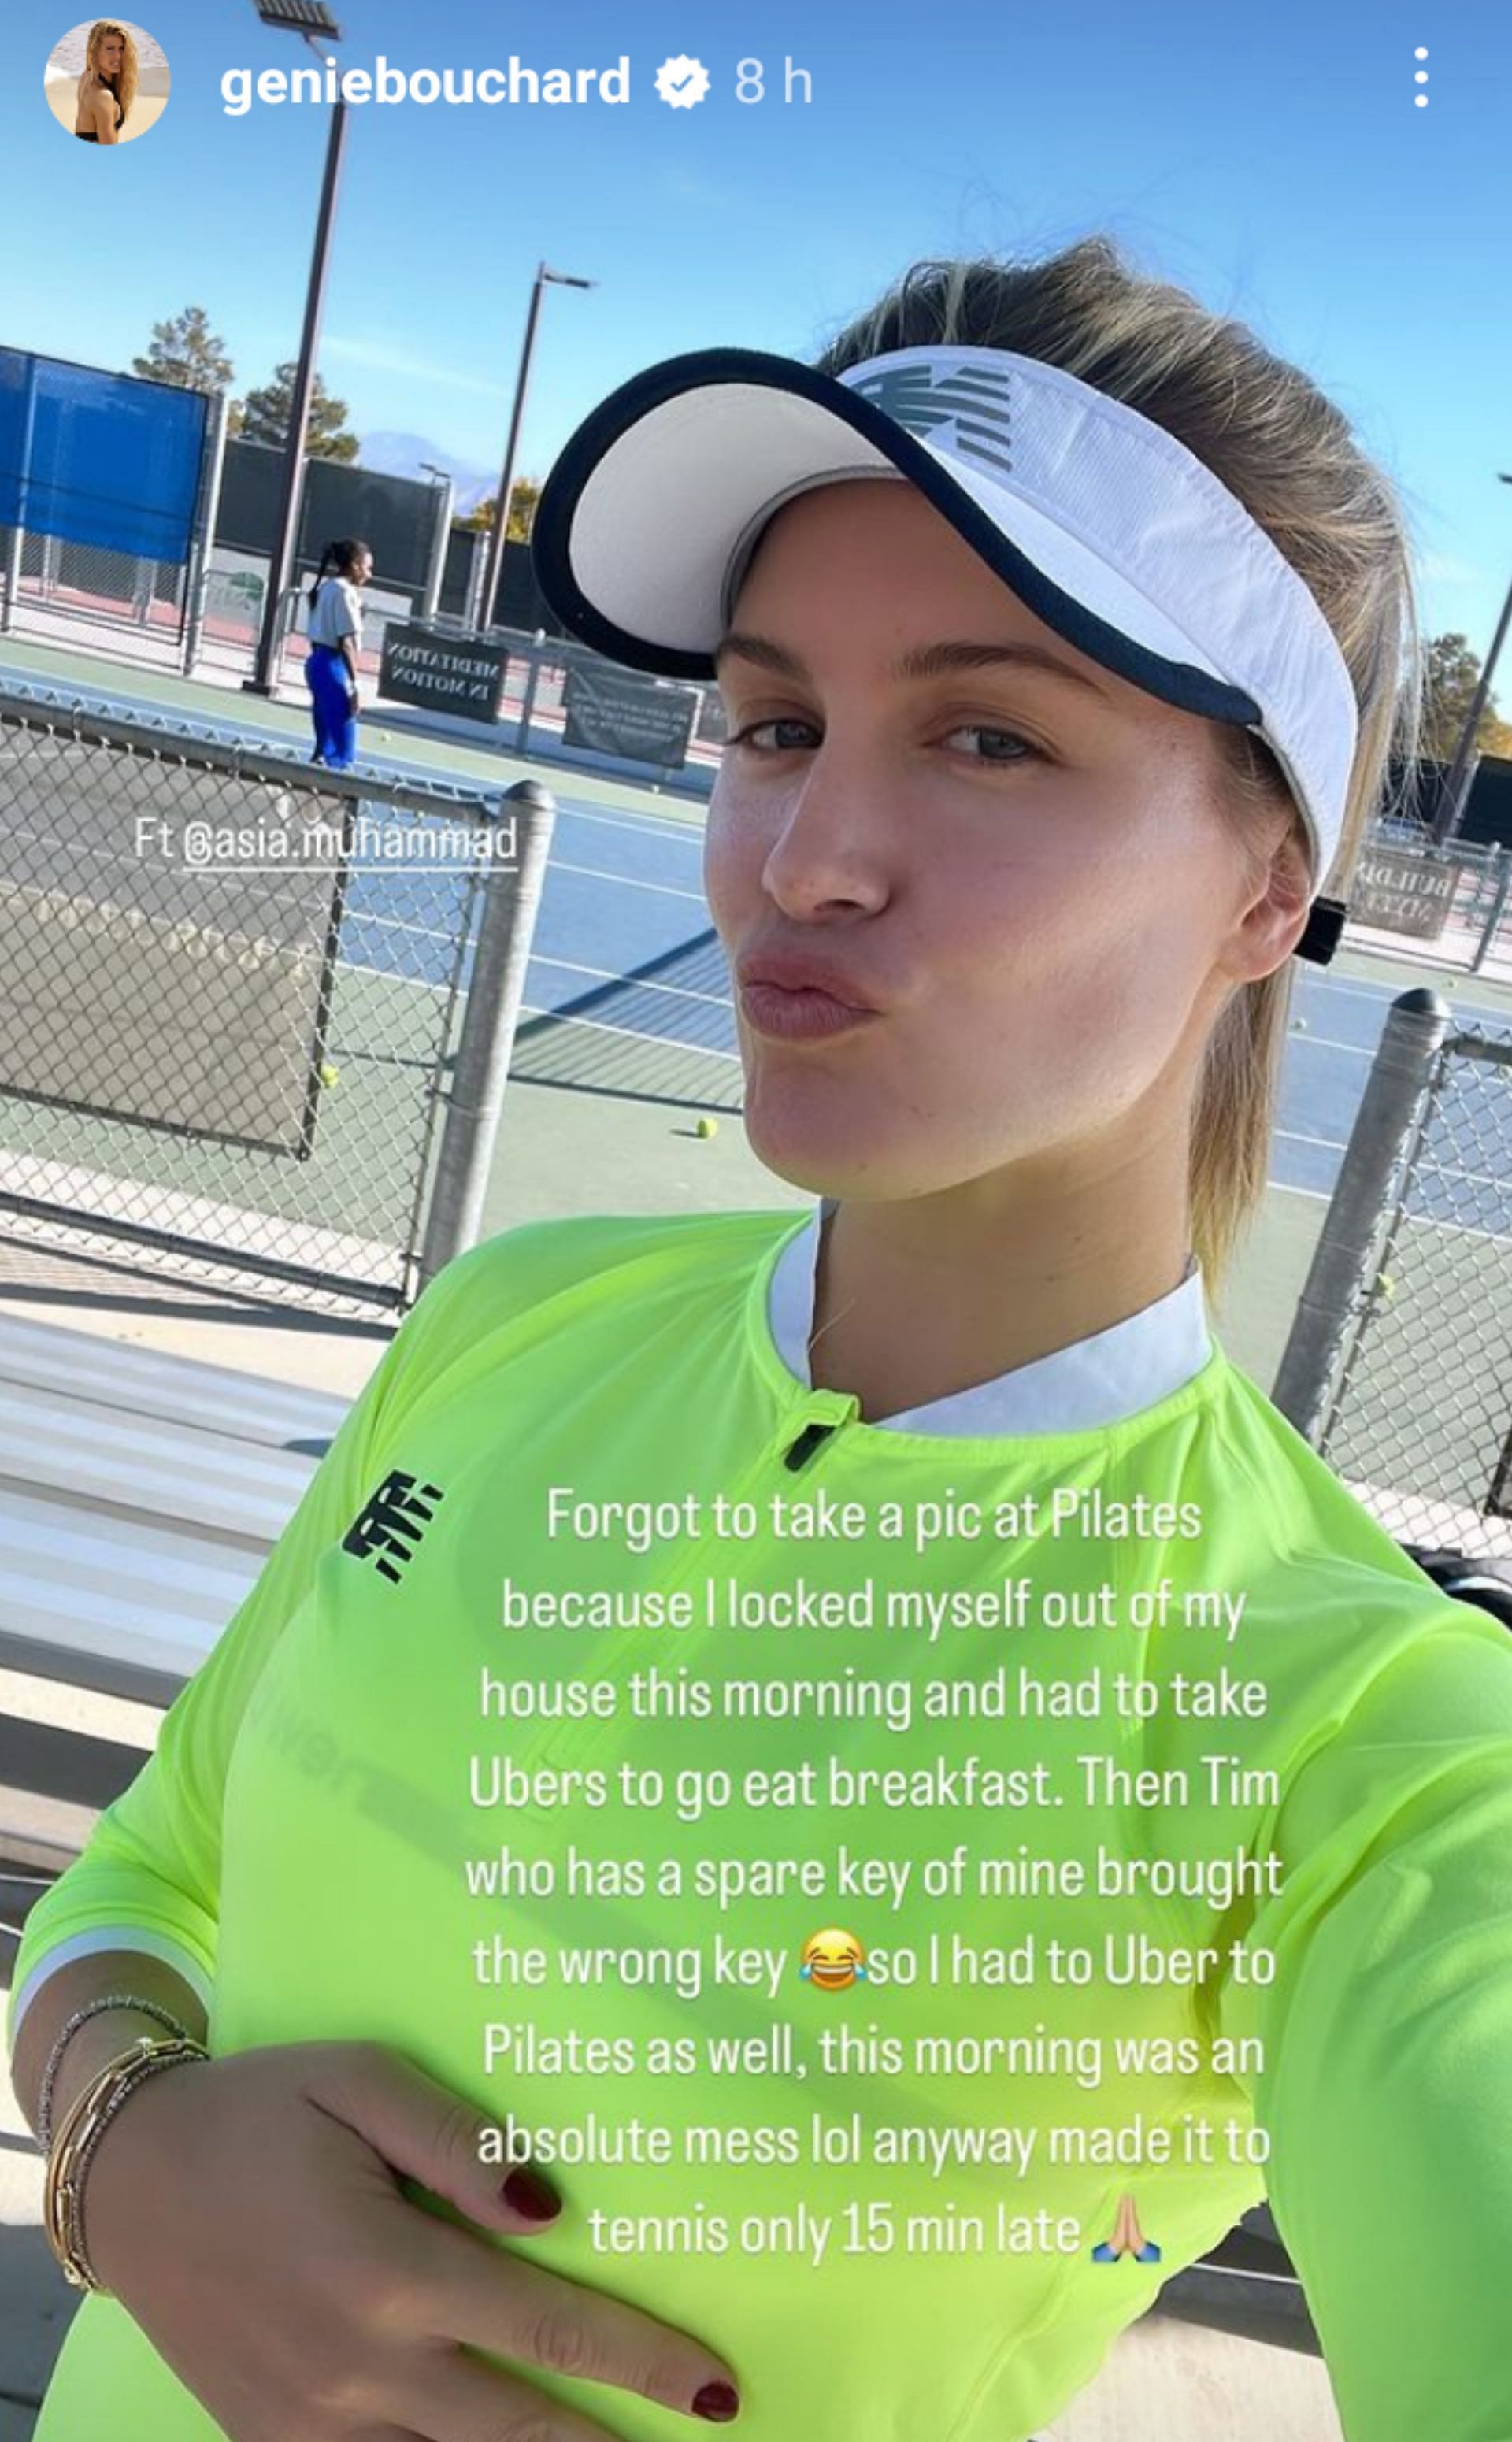 Eugenie Bouchard posted on Instagram stories